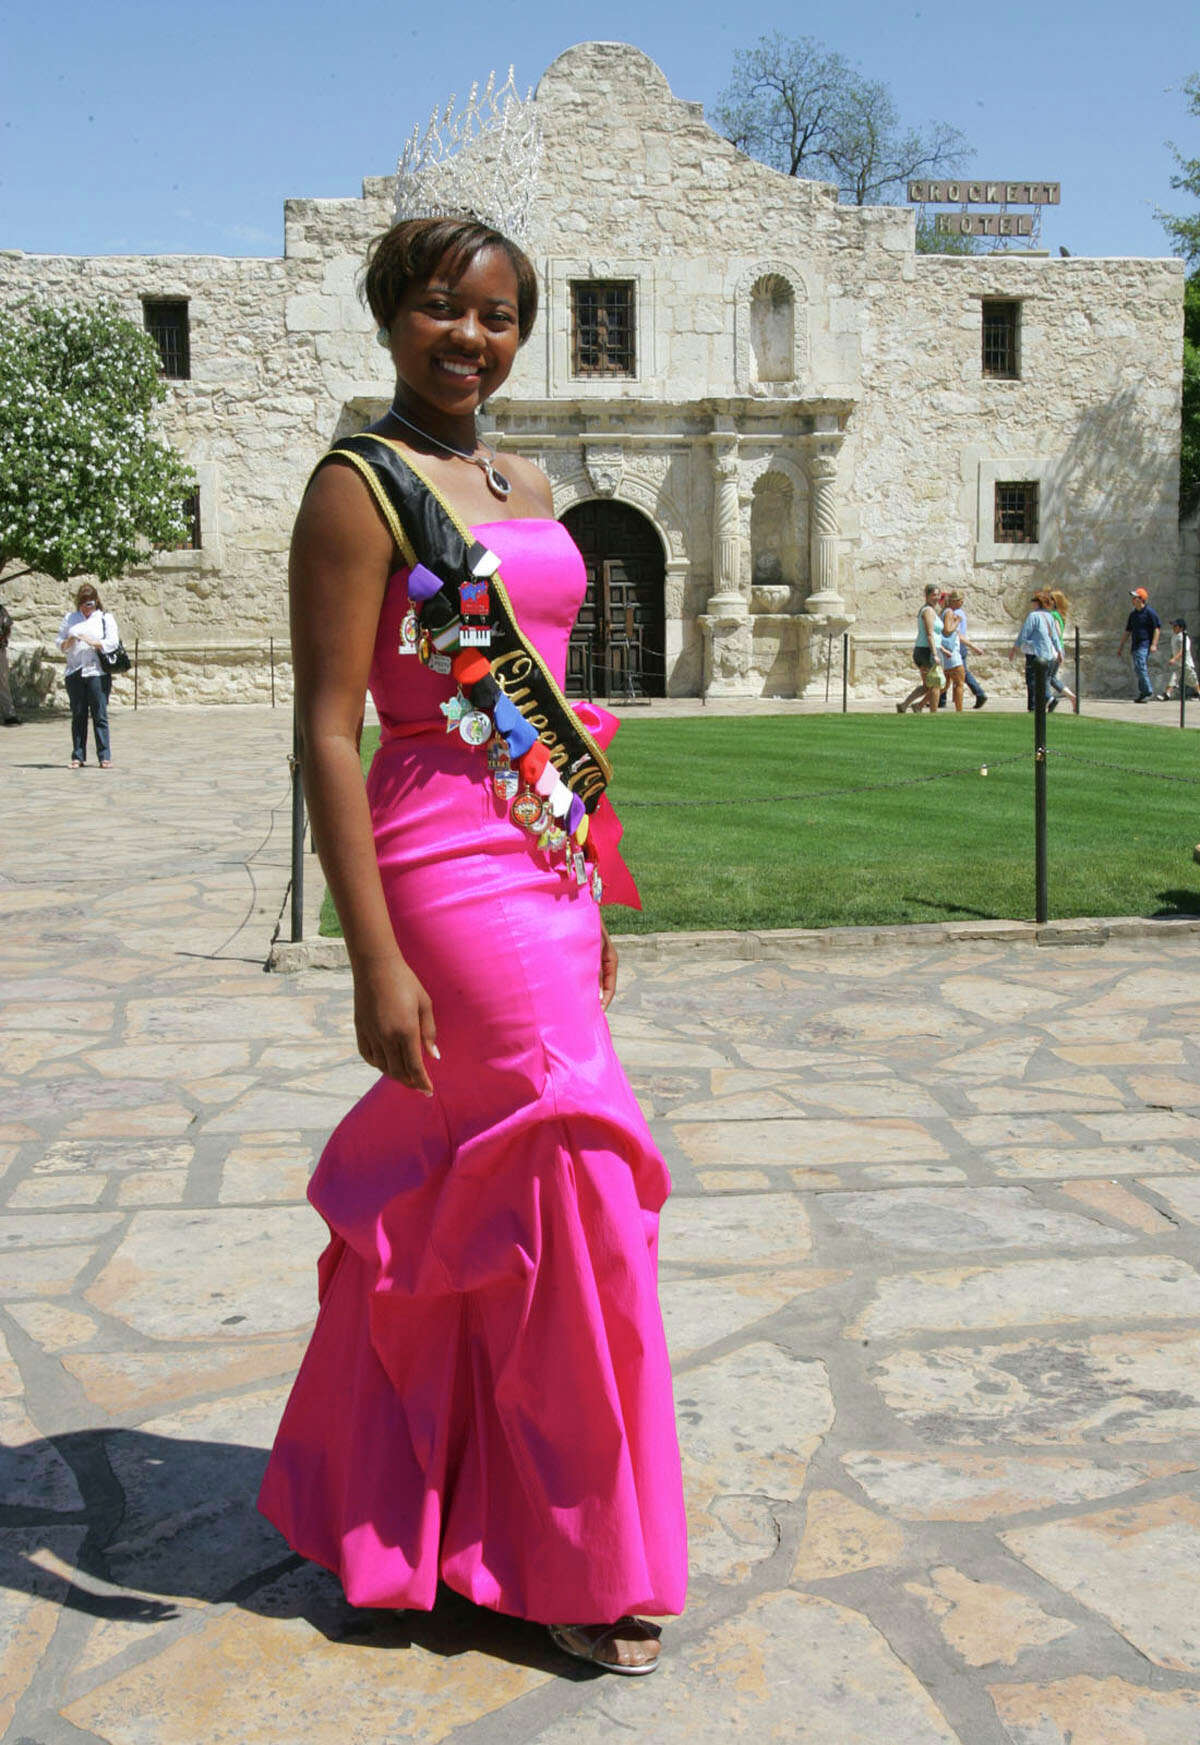 Ashley Dixon has been named Miss San Antonio 2011 by pageant organizers.